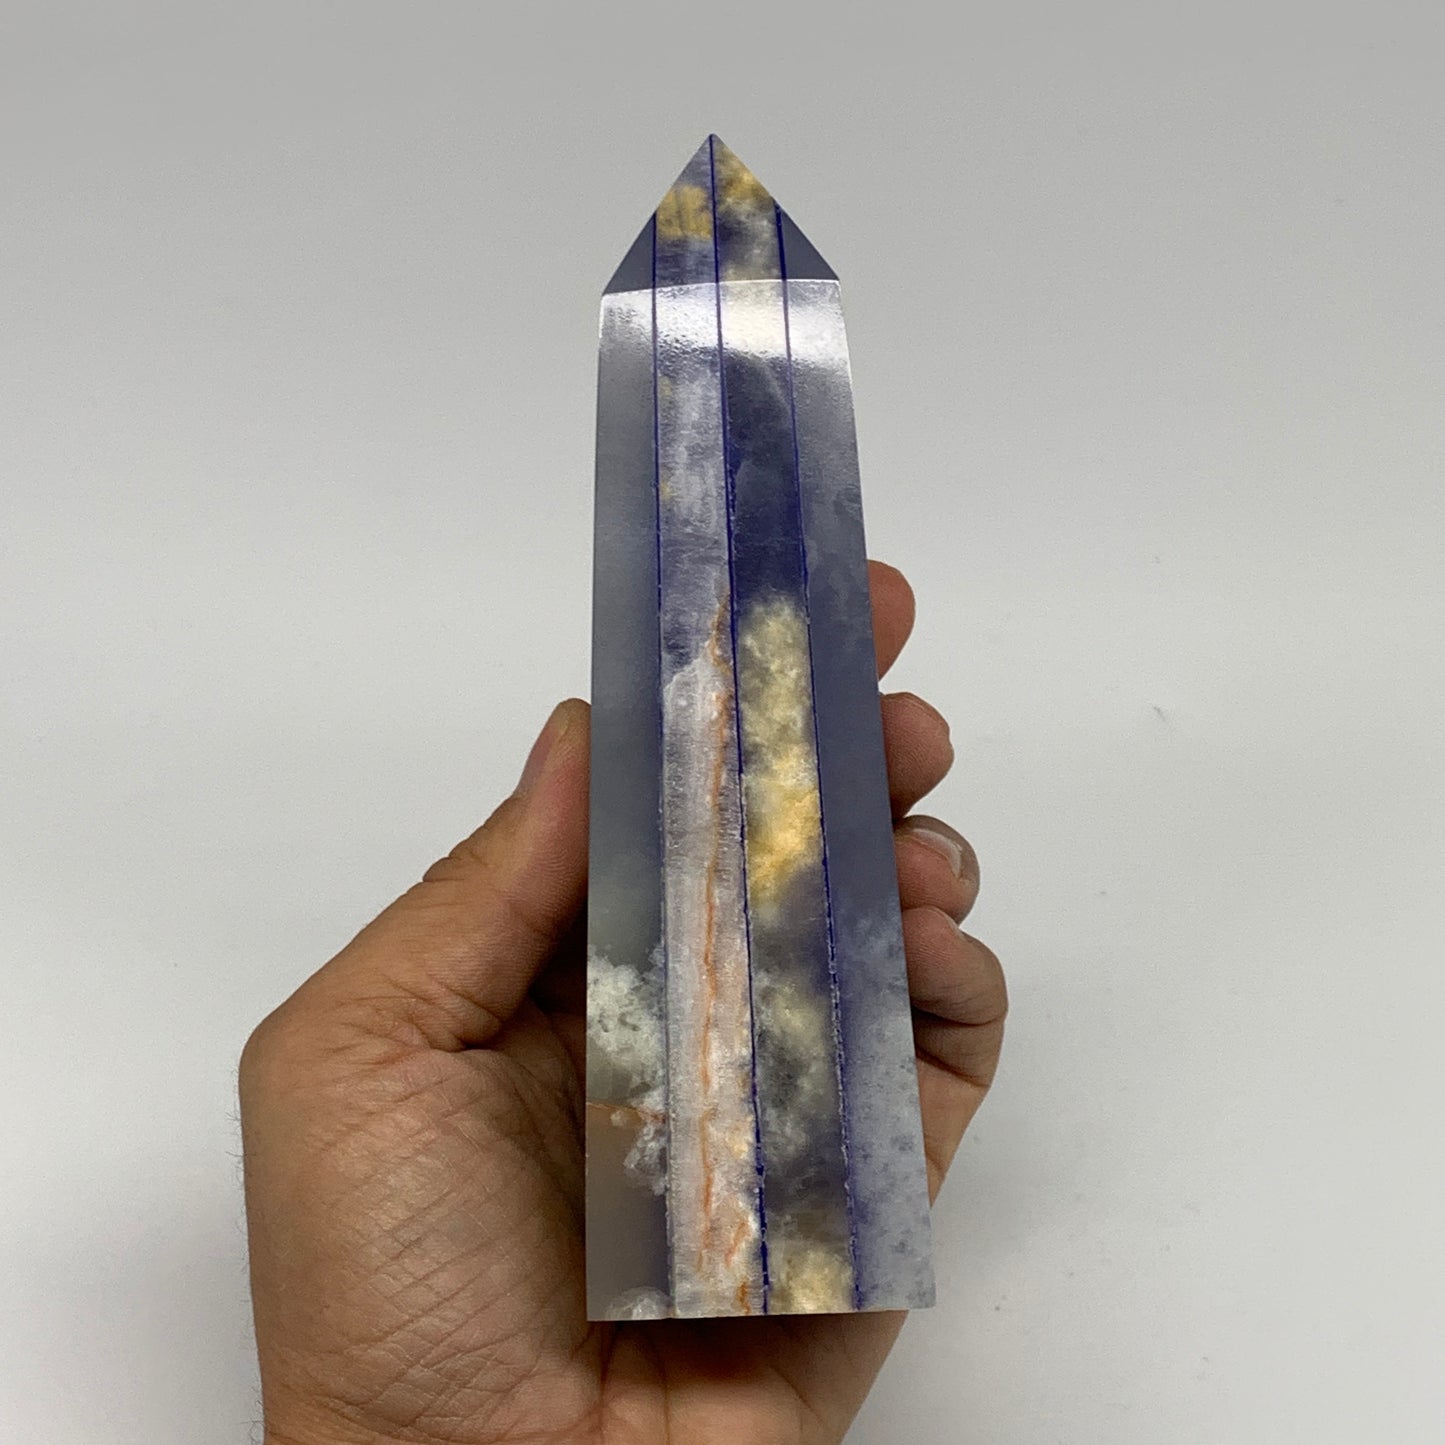 487.3g, 5.9"x1.6"x1.7" Dyed/Heated Calcite Point Tower Obelisk Crystal, B24991